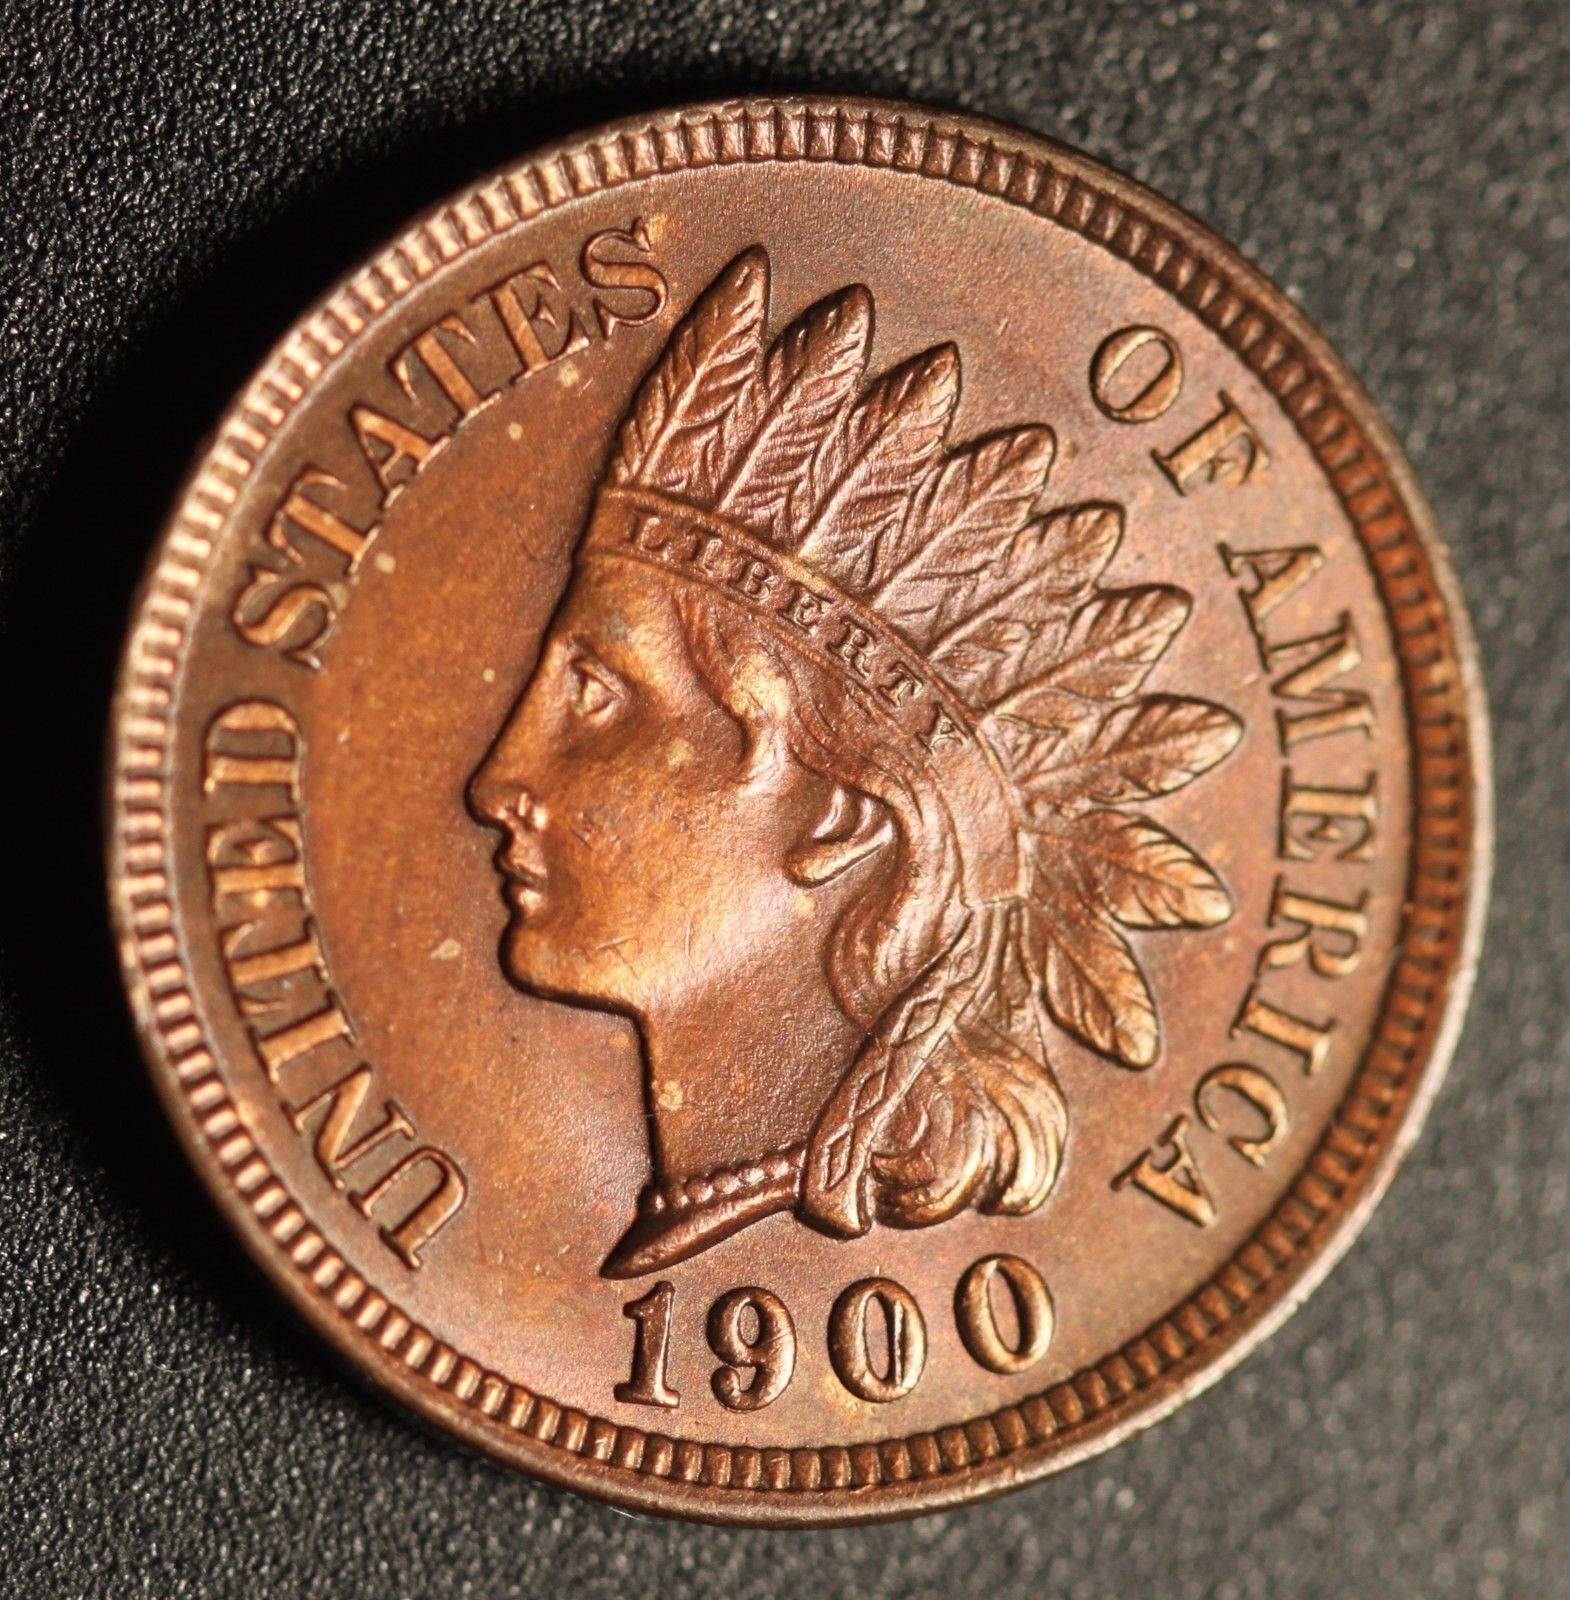 1900 RPD-028 - Indian Head Penny - Photo by Ed Nathanson